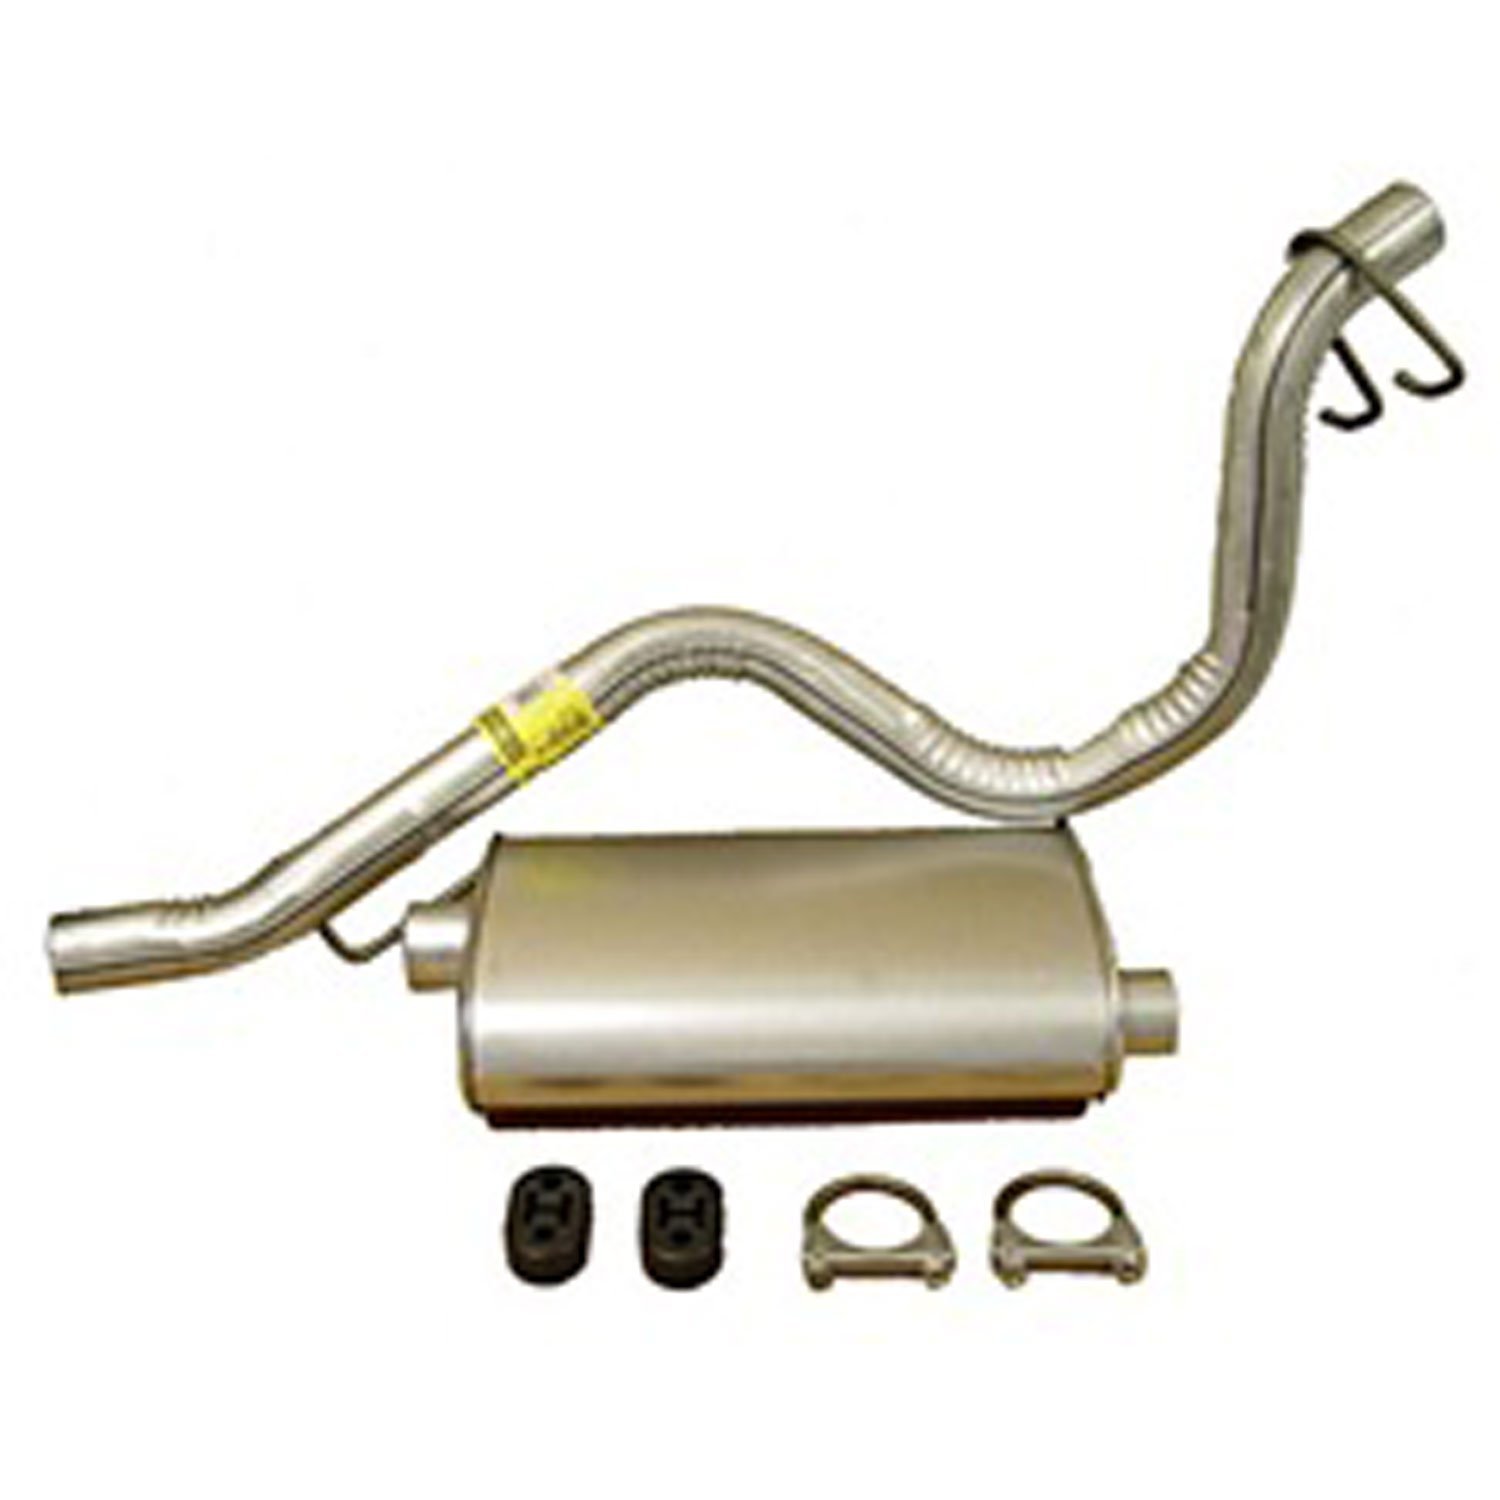 Muffler and Tailpipe Kit Includes Clamps and Hangers